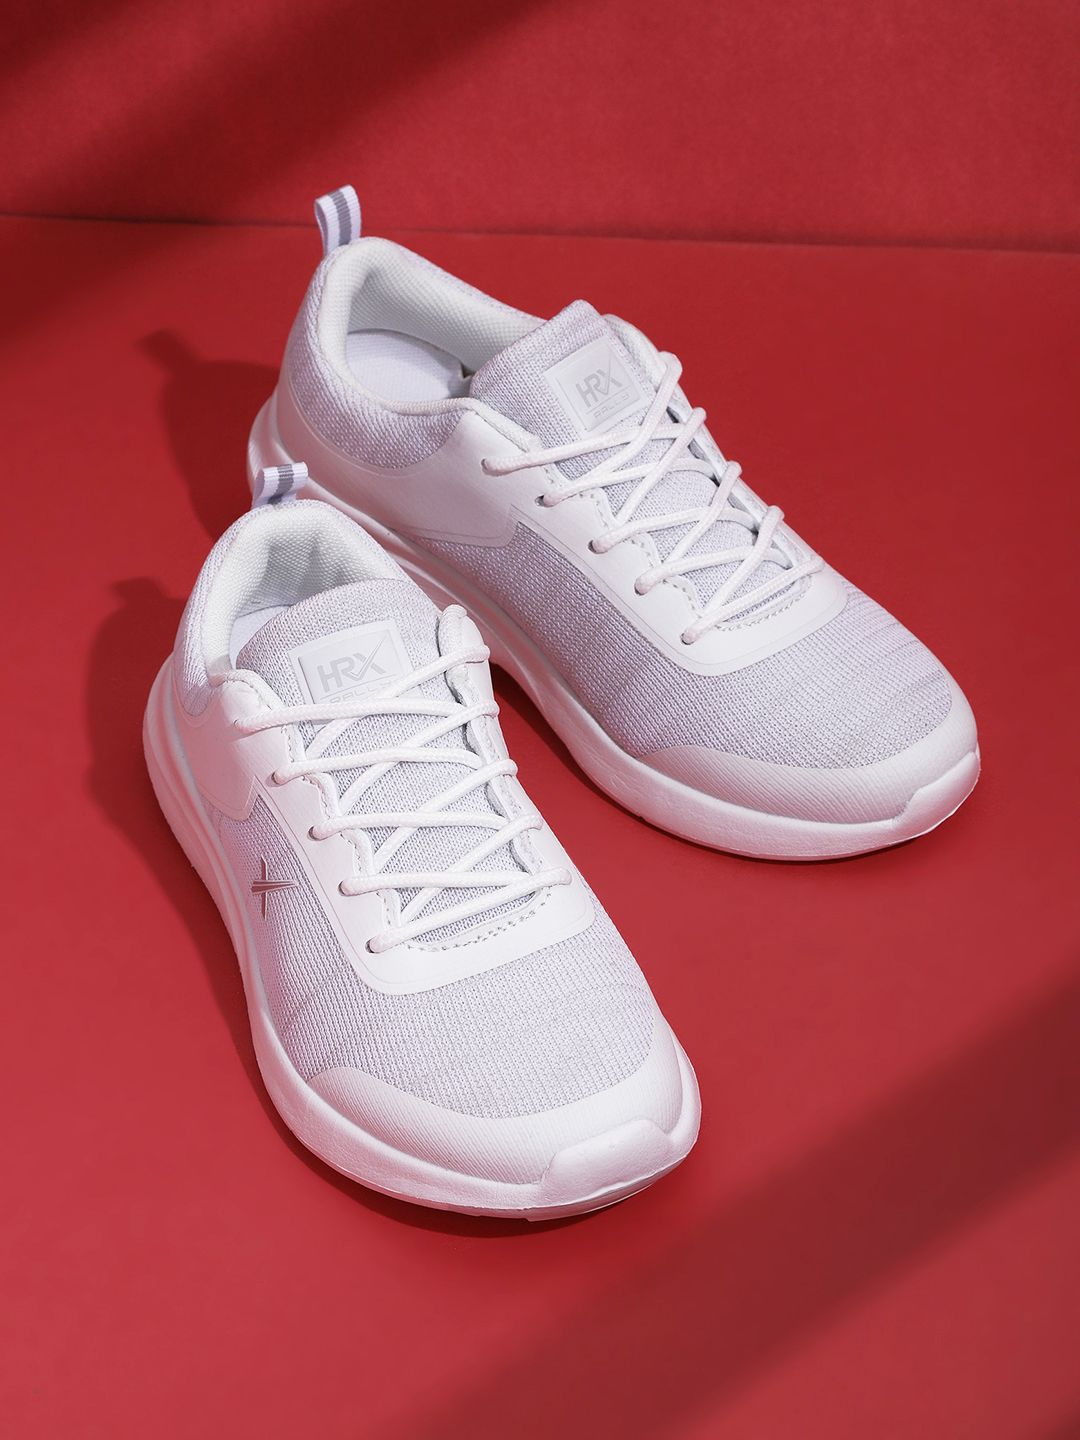 HRX by Hrithik Roshan Women White Training Shoes Price in India